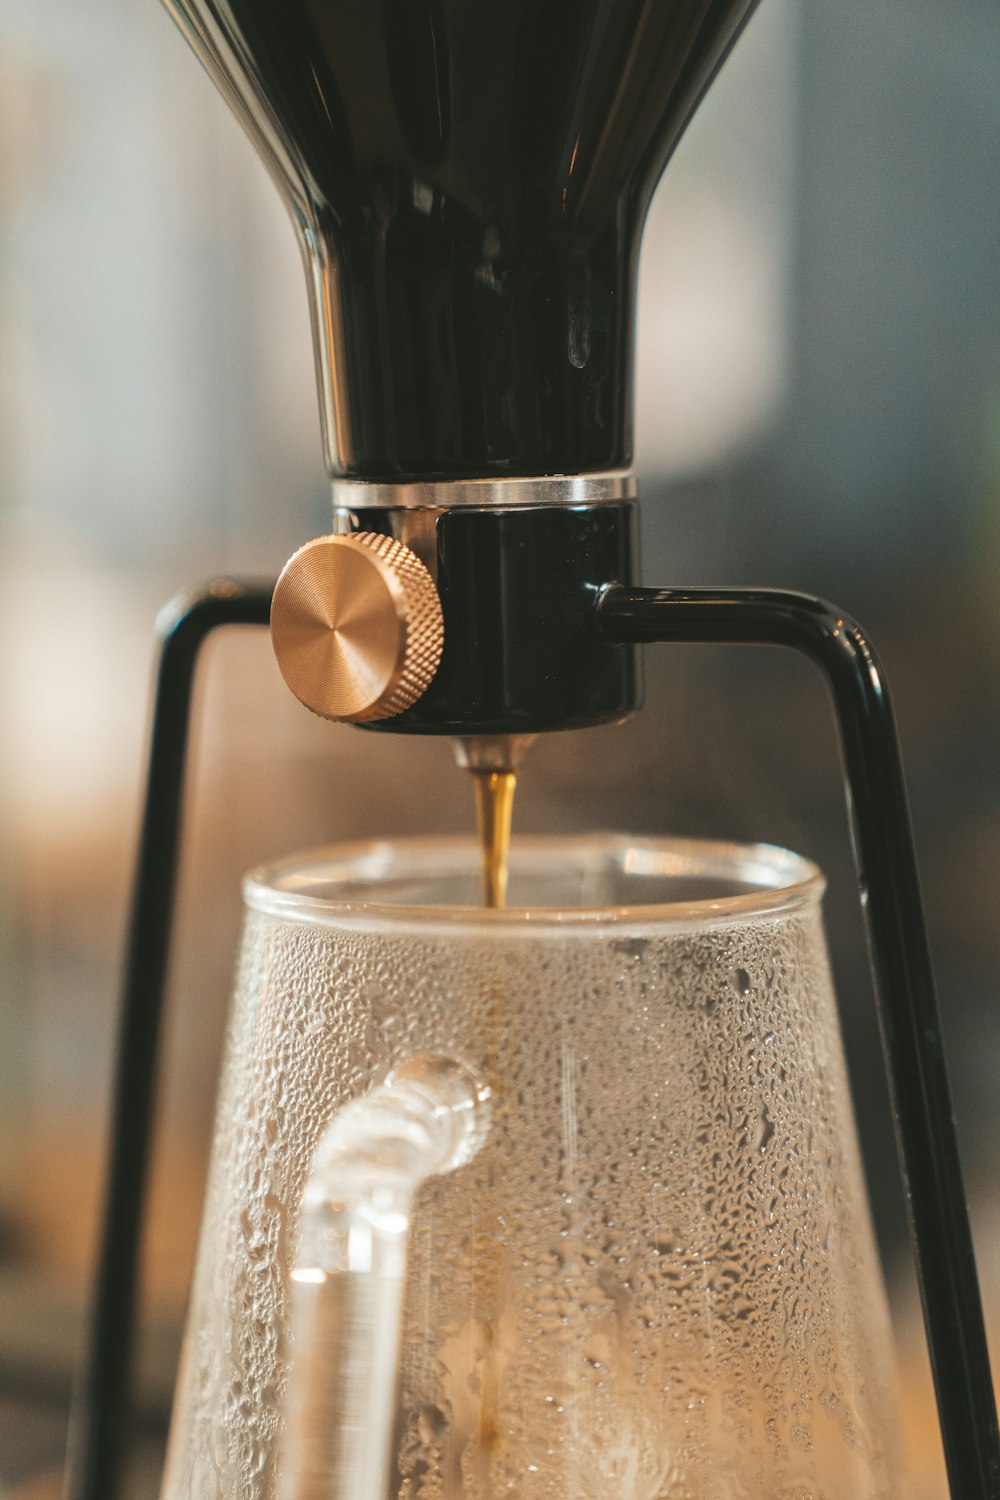 black and white coffee maker pouring water on clear glass cup